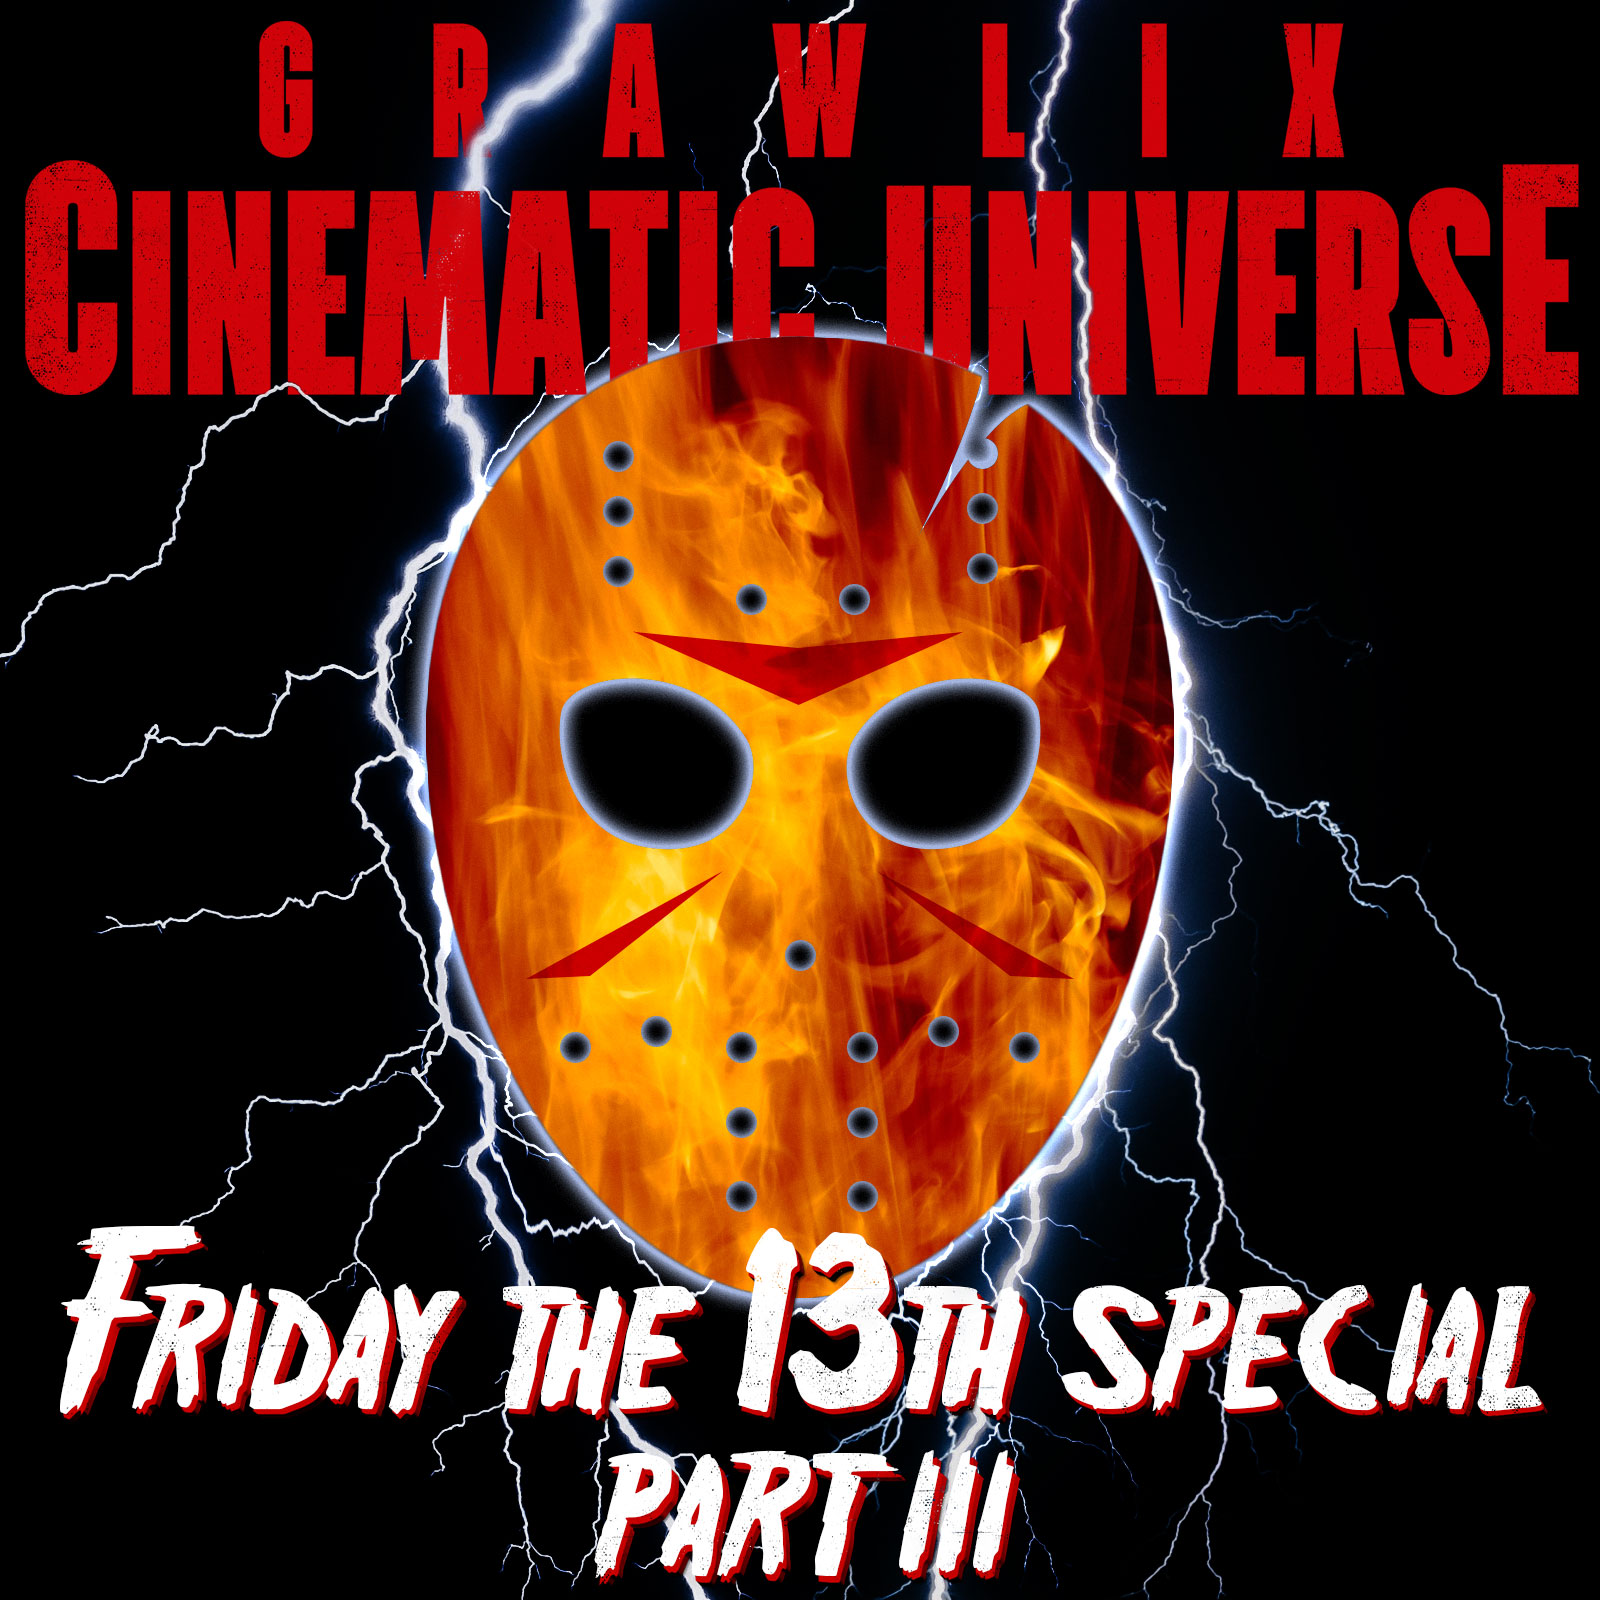 Friday the 13th Special Part 3